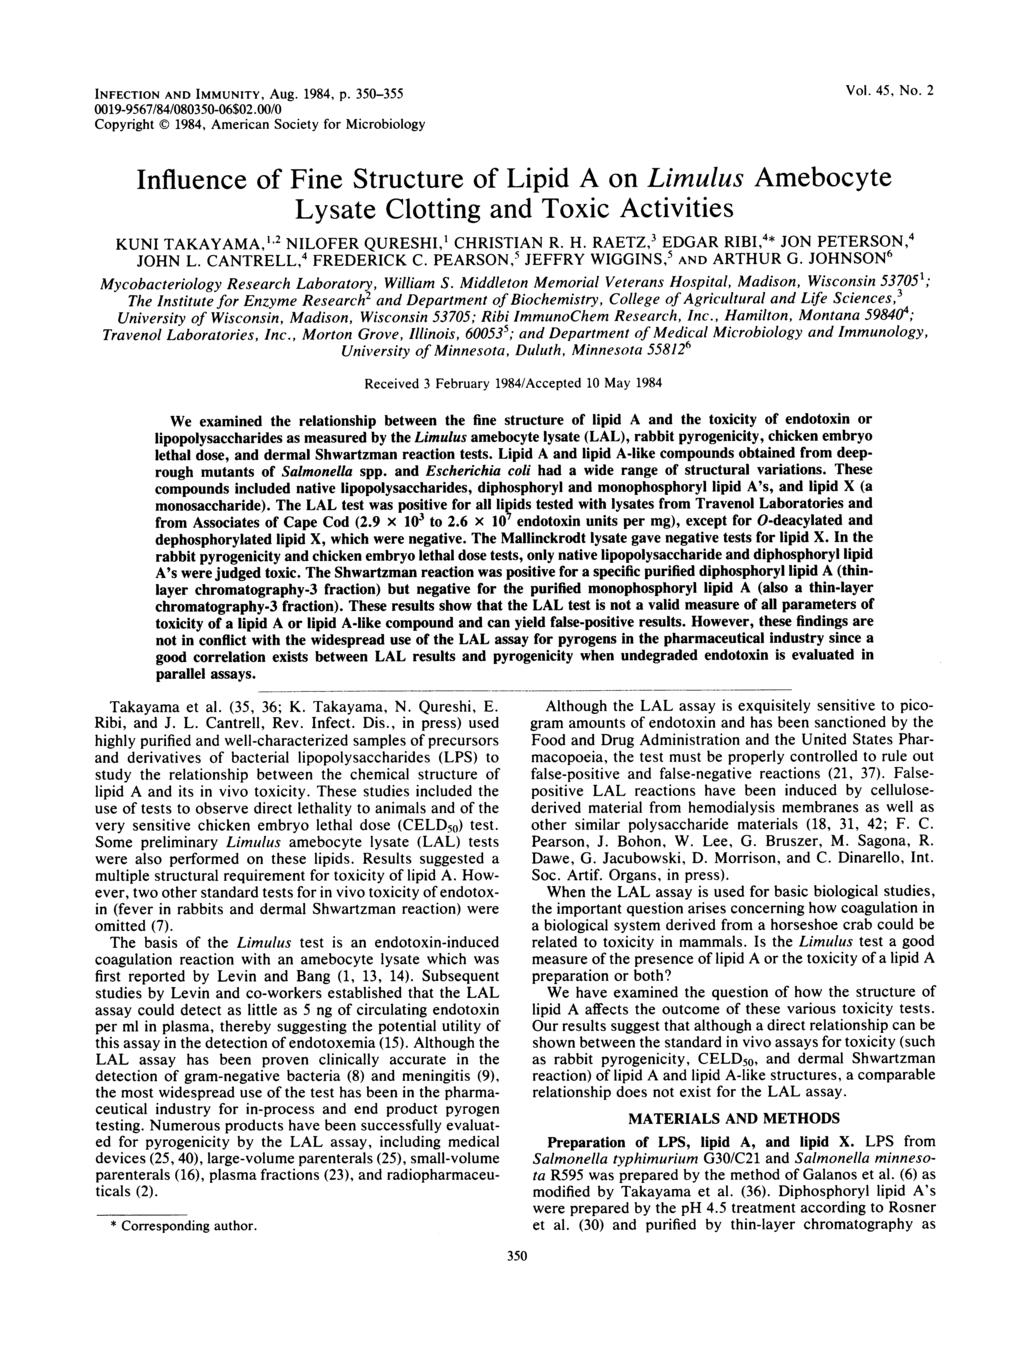 INFECTION AND IMMUNITY, Aug. 1984, p. 350-355 Vol. 45, No. 2 0019-9567/84/080350-06$02.